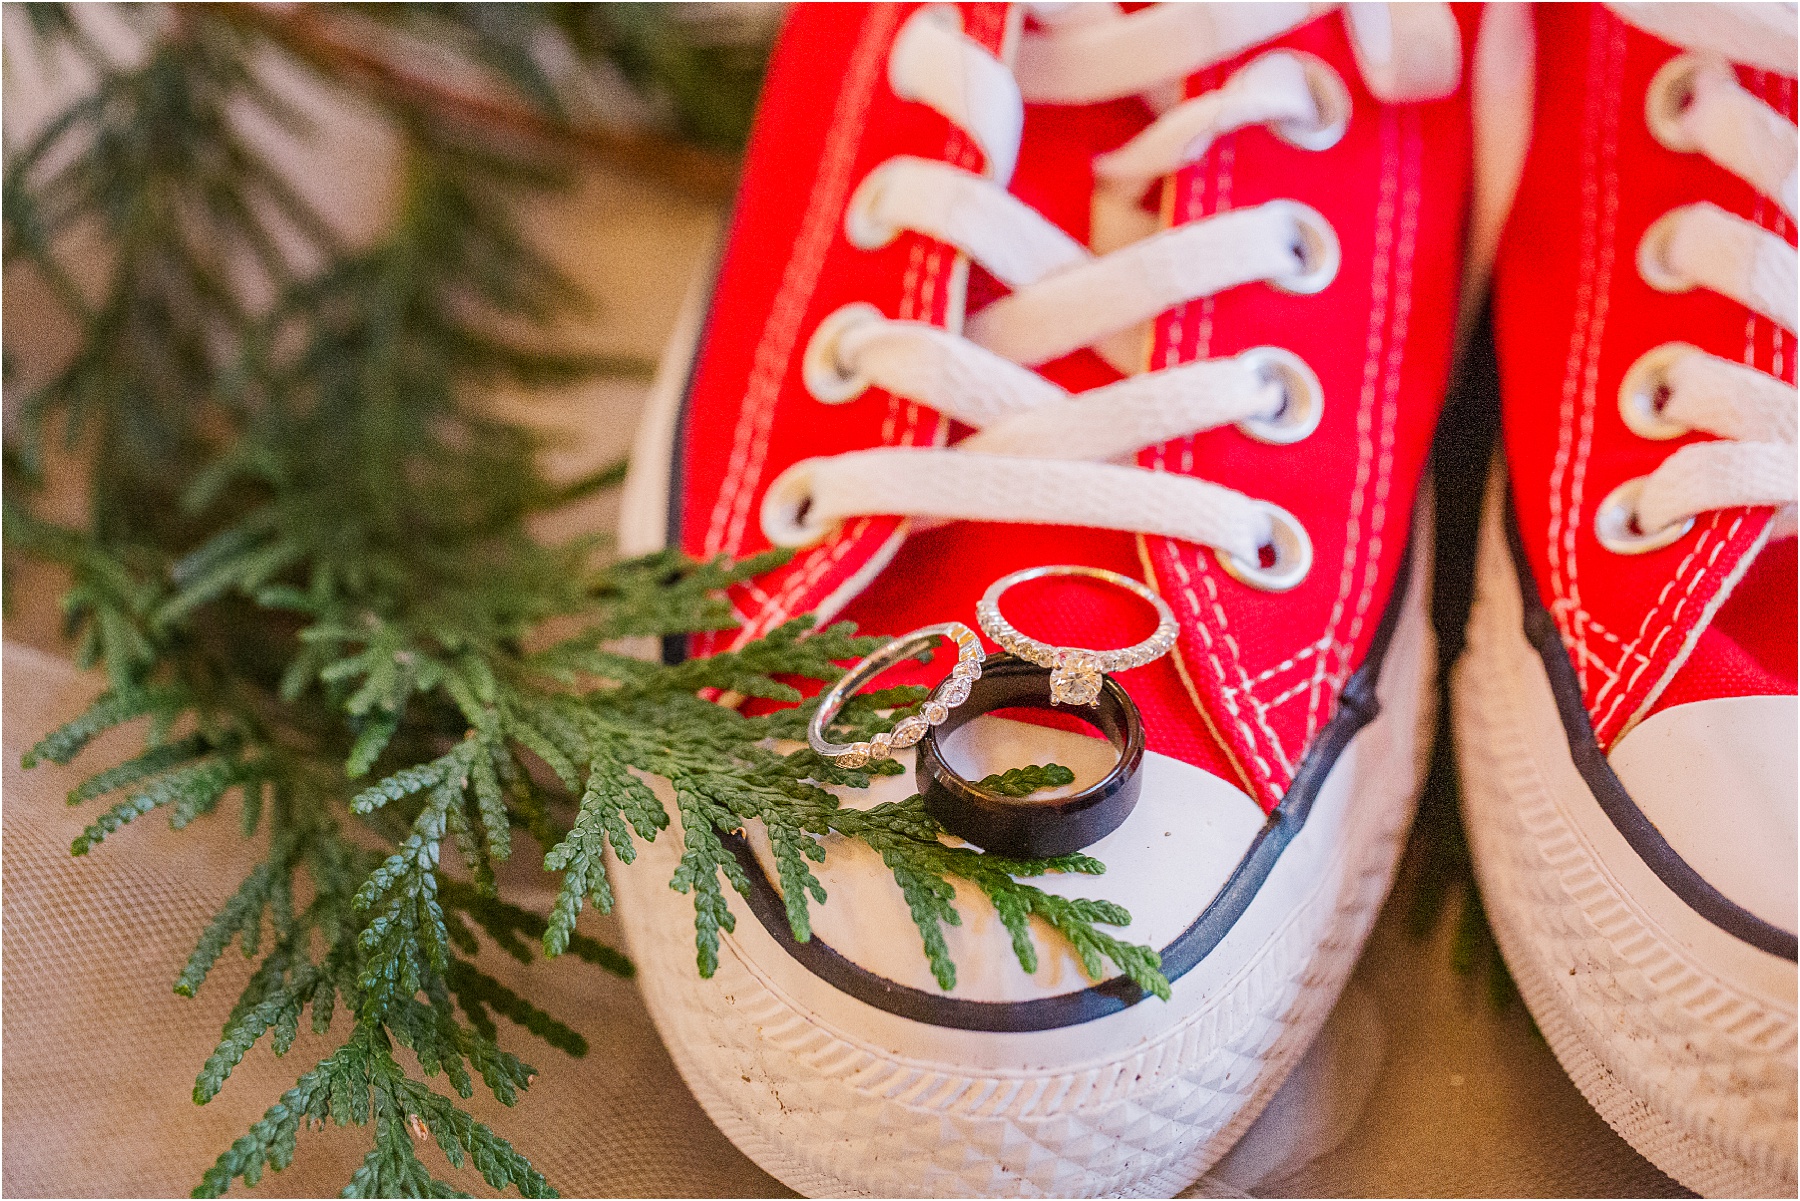 weddings bands on top of red converses